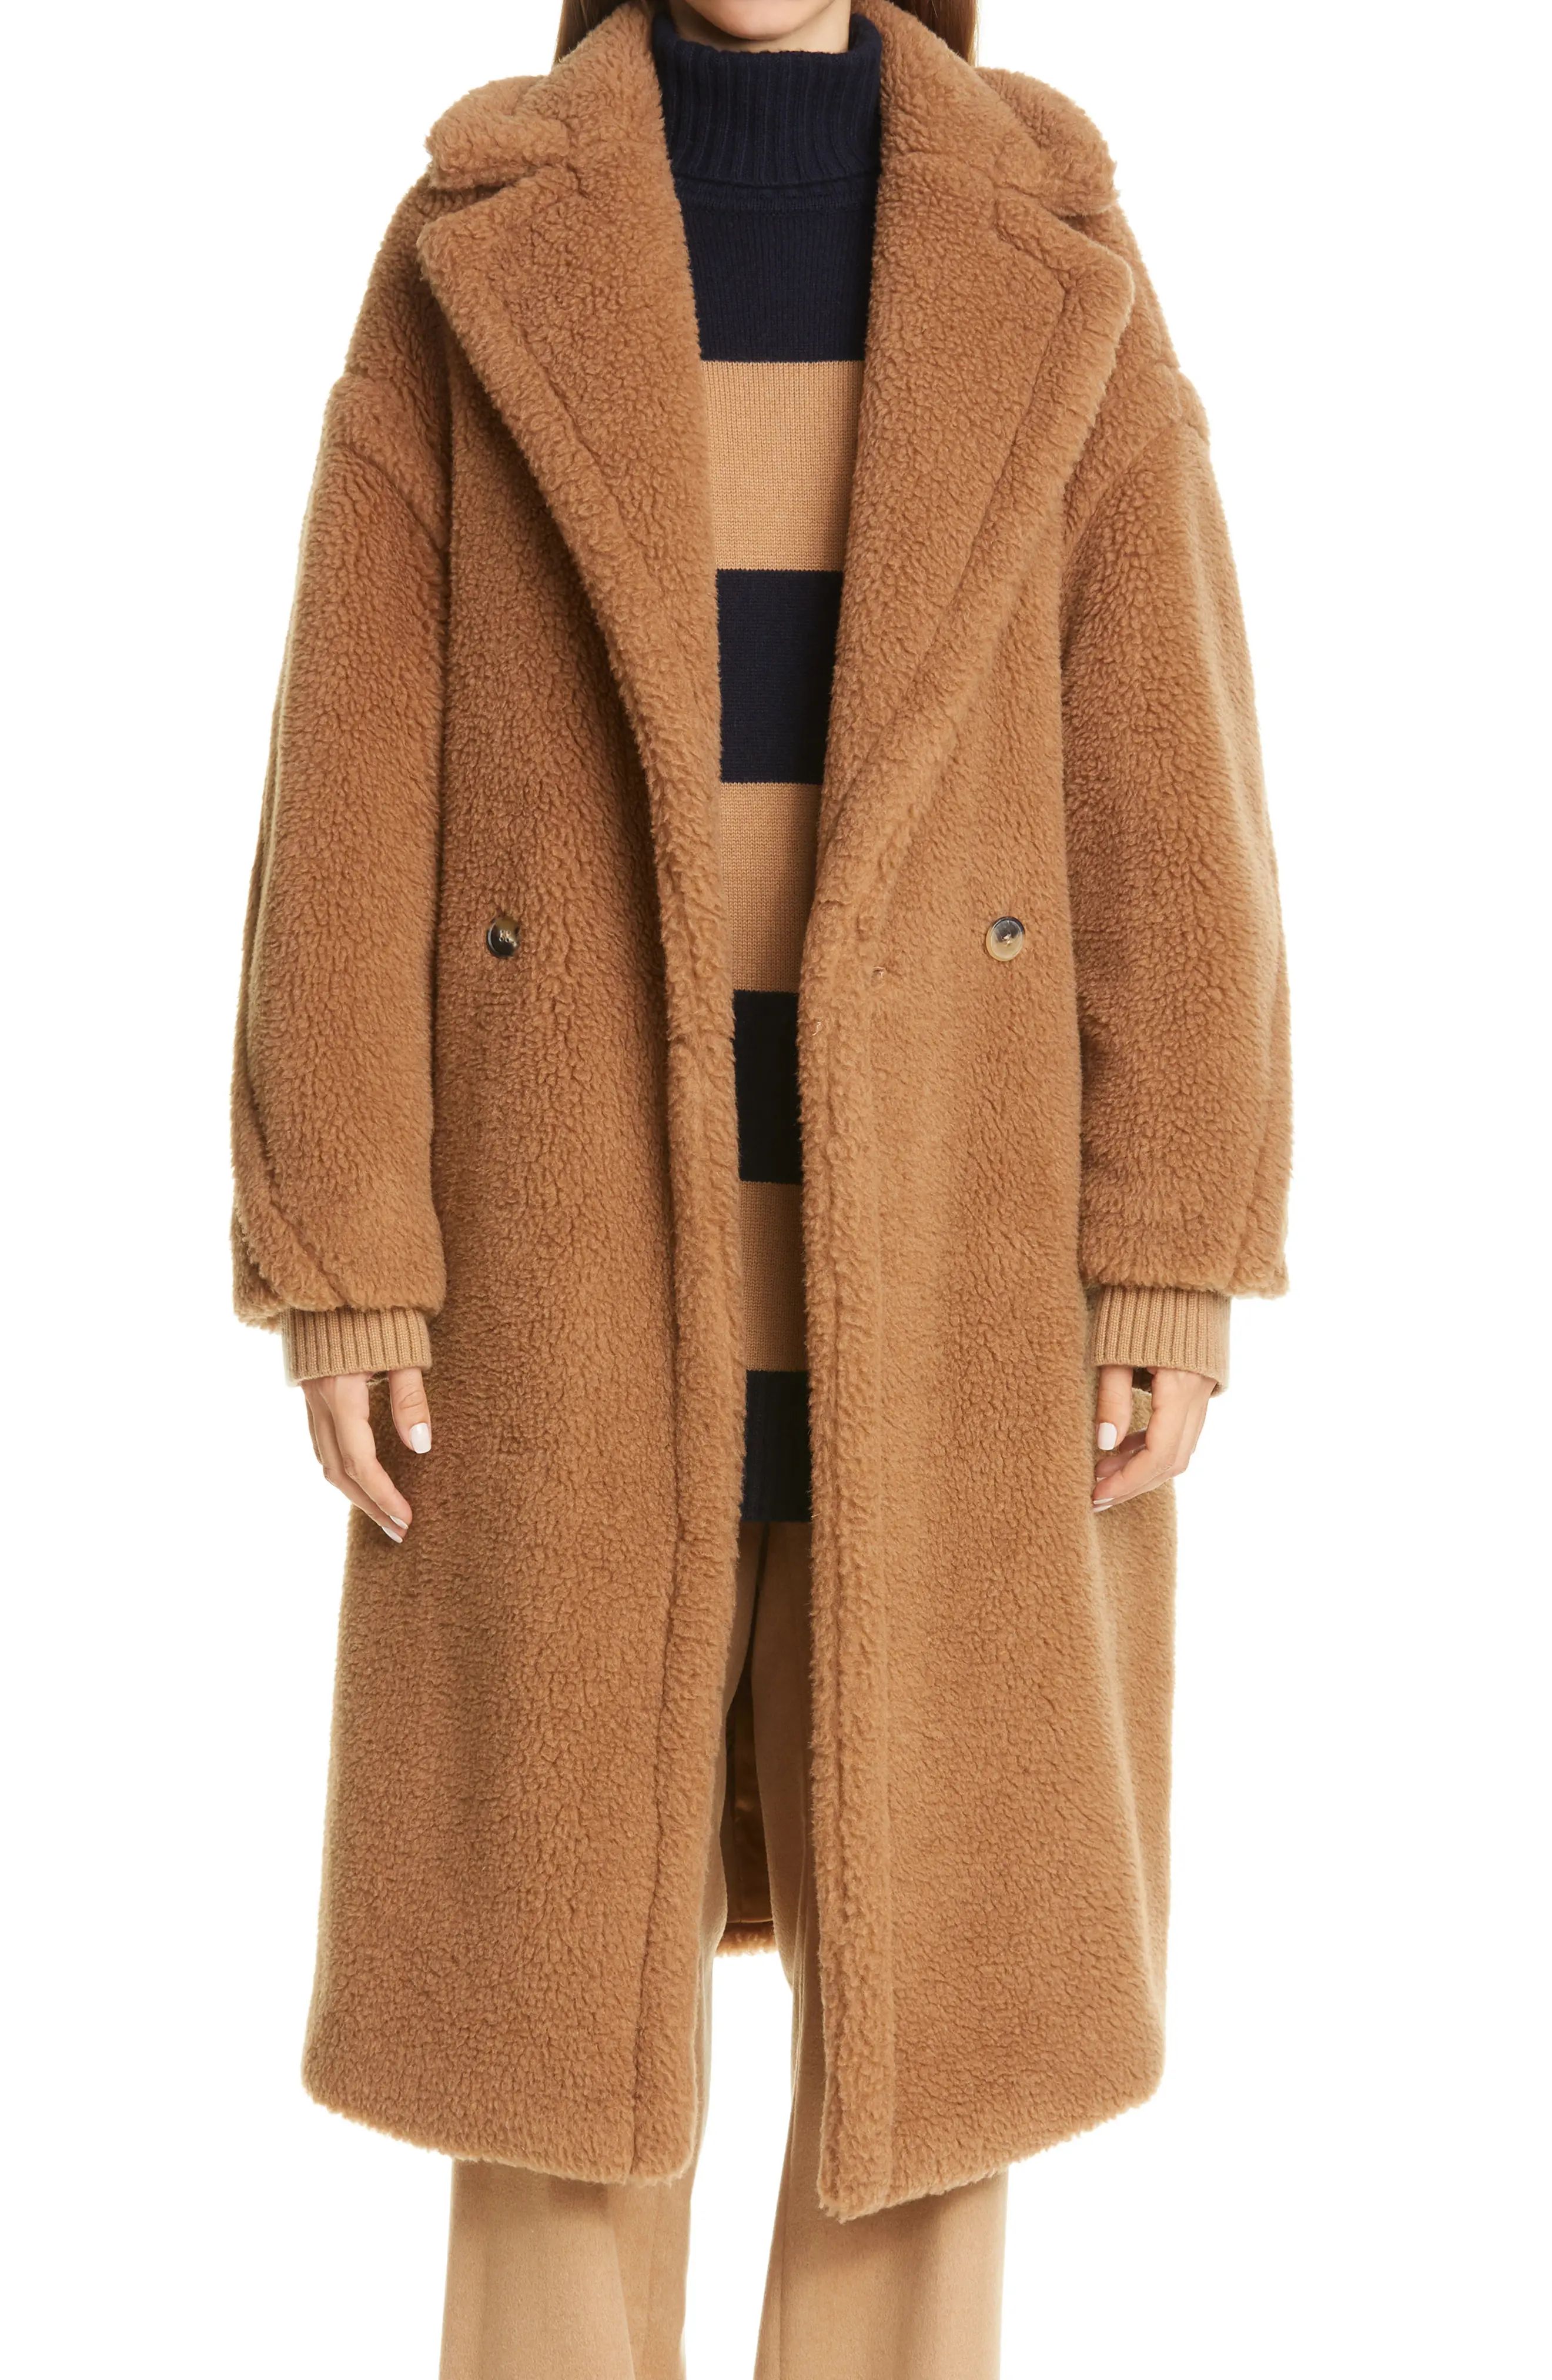 Max Mara Teddy Bear Icon Faux Fur Coat, Size Small in Camel at Nordstrom | Nordstrom